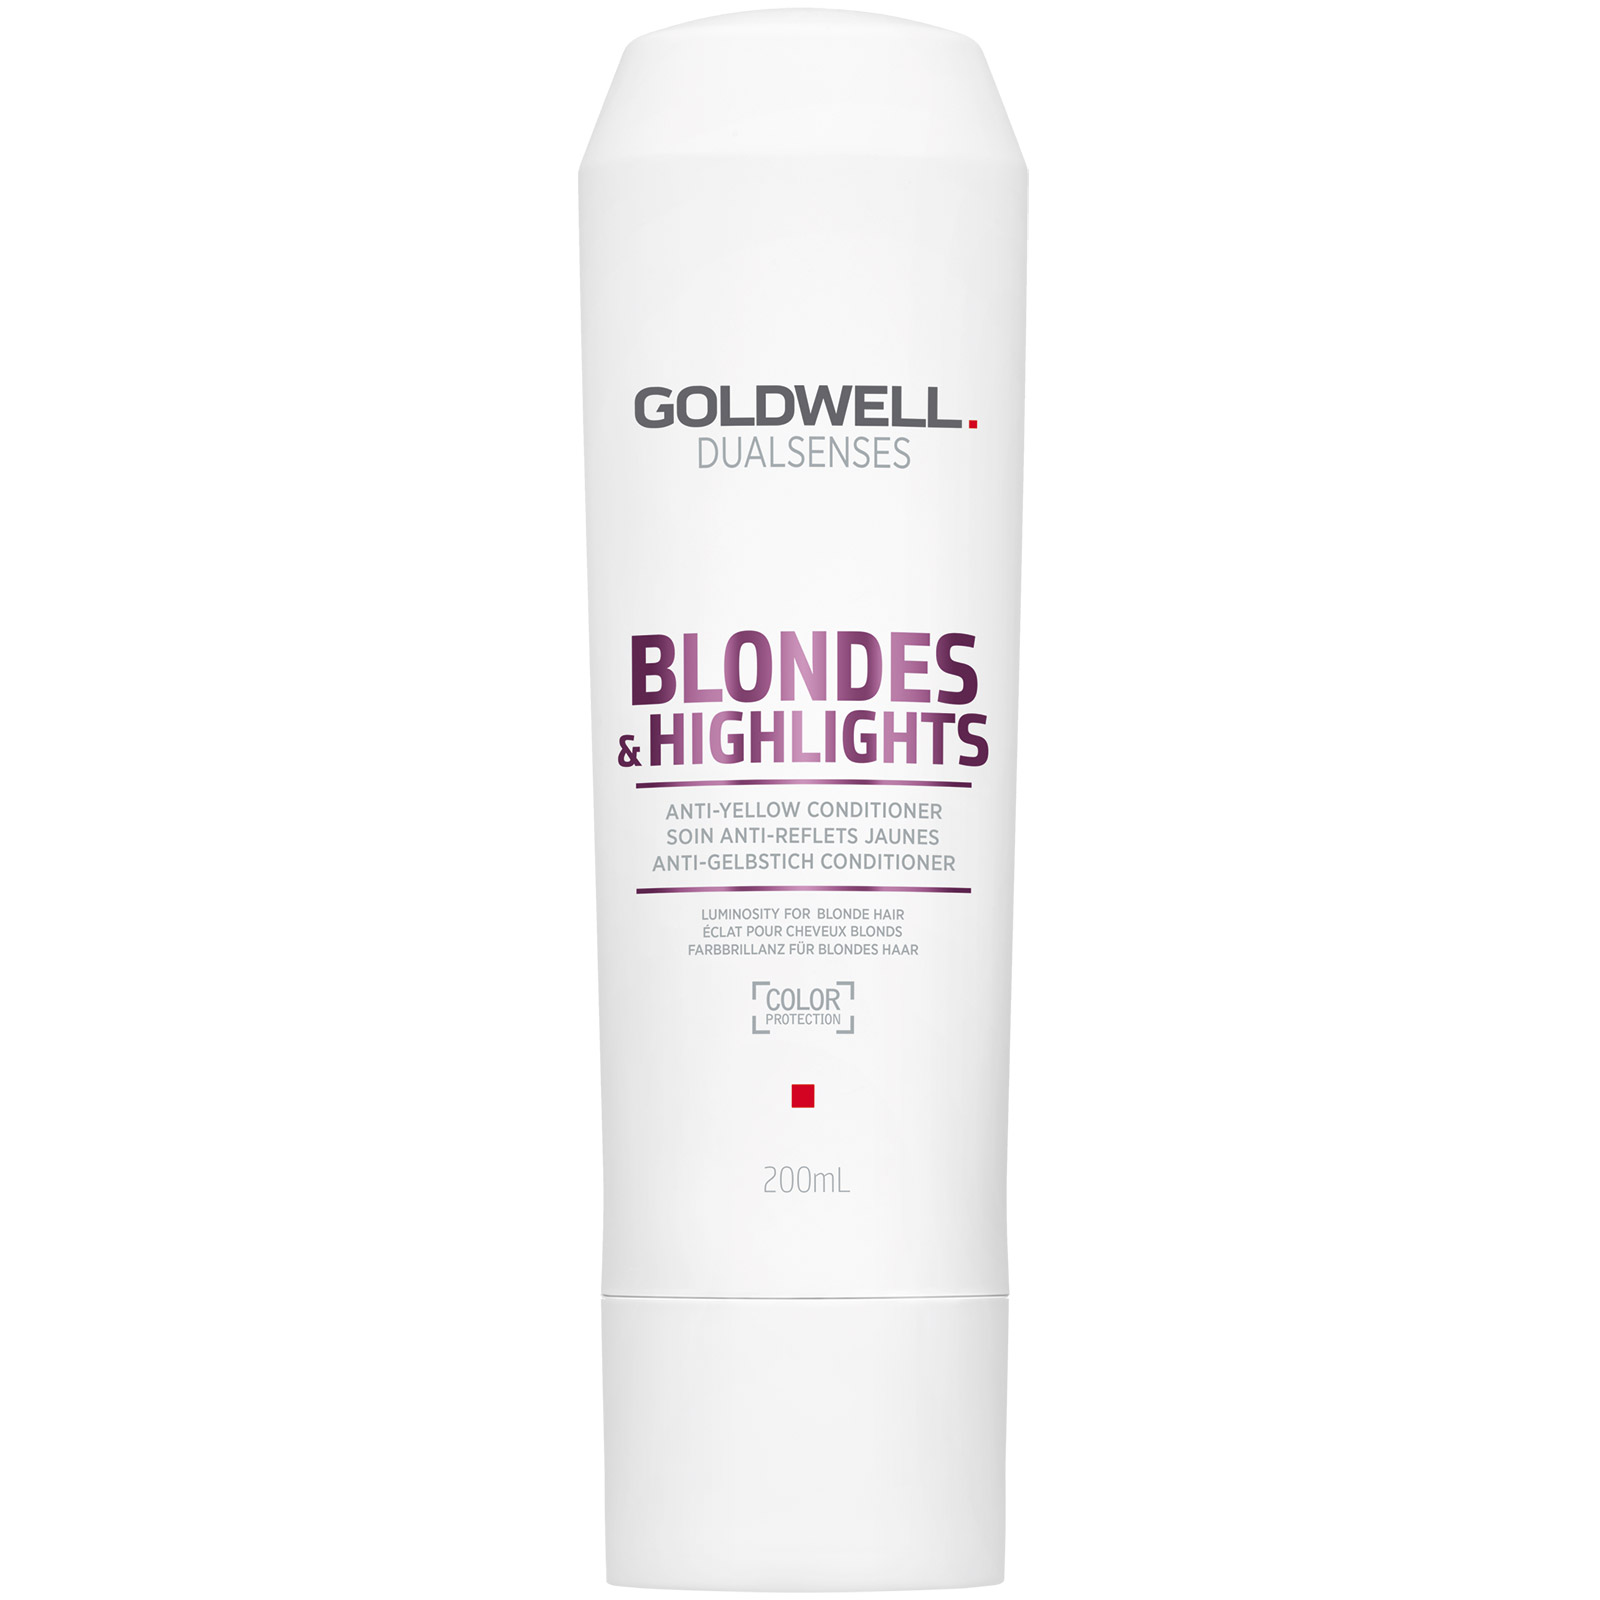 Goldwell - Dualsenses Blondes&Highlights - Anti-Yellow Conditioner - 200 ml